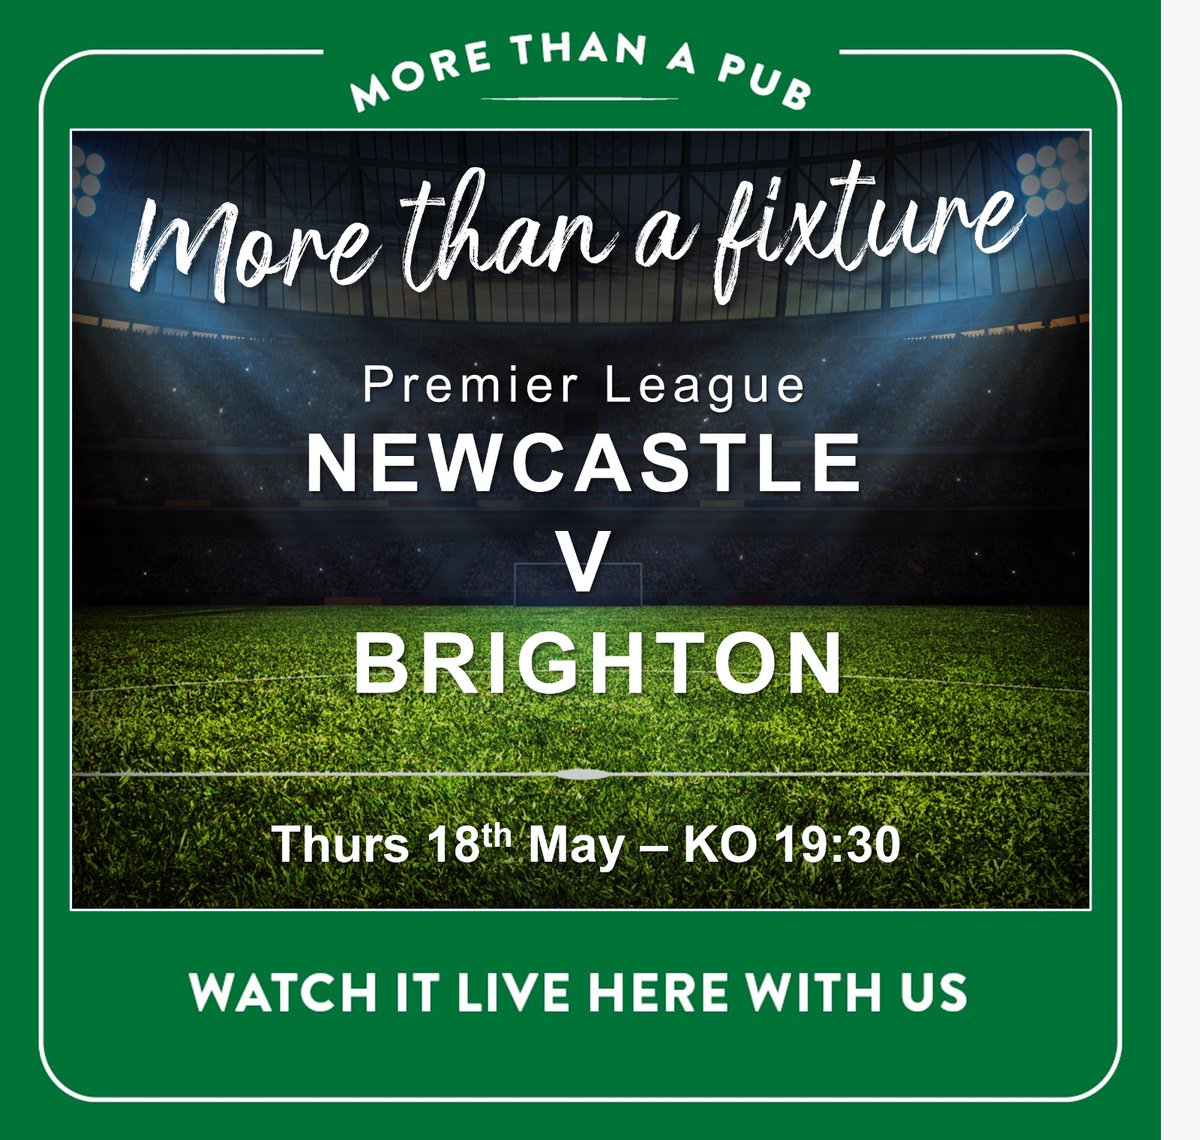 #welovesports #nr2 #students #norwich #freepool #offers #realalepub #ThirstyThursdays #SupportYourSport #toon #muiltscreens #outsidescreens #beerandciderfestival